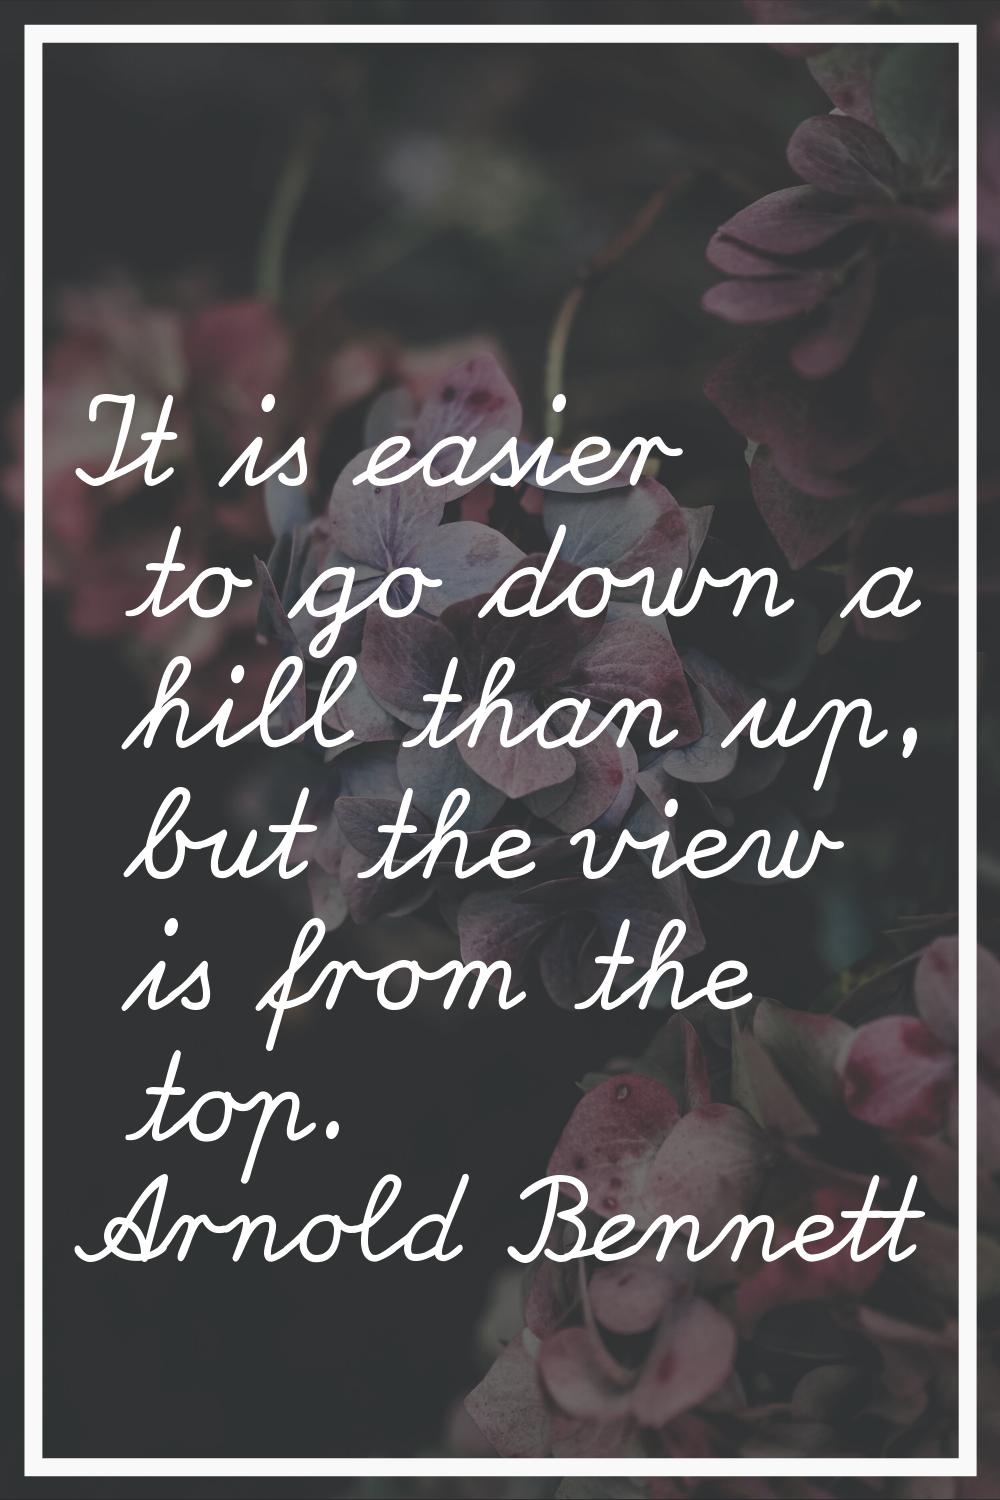 It is easier to go down a hill than up, but the view is from the top.